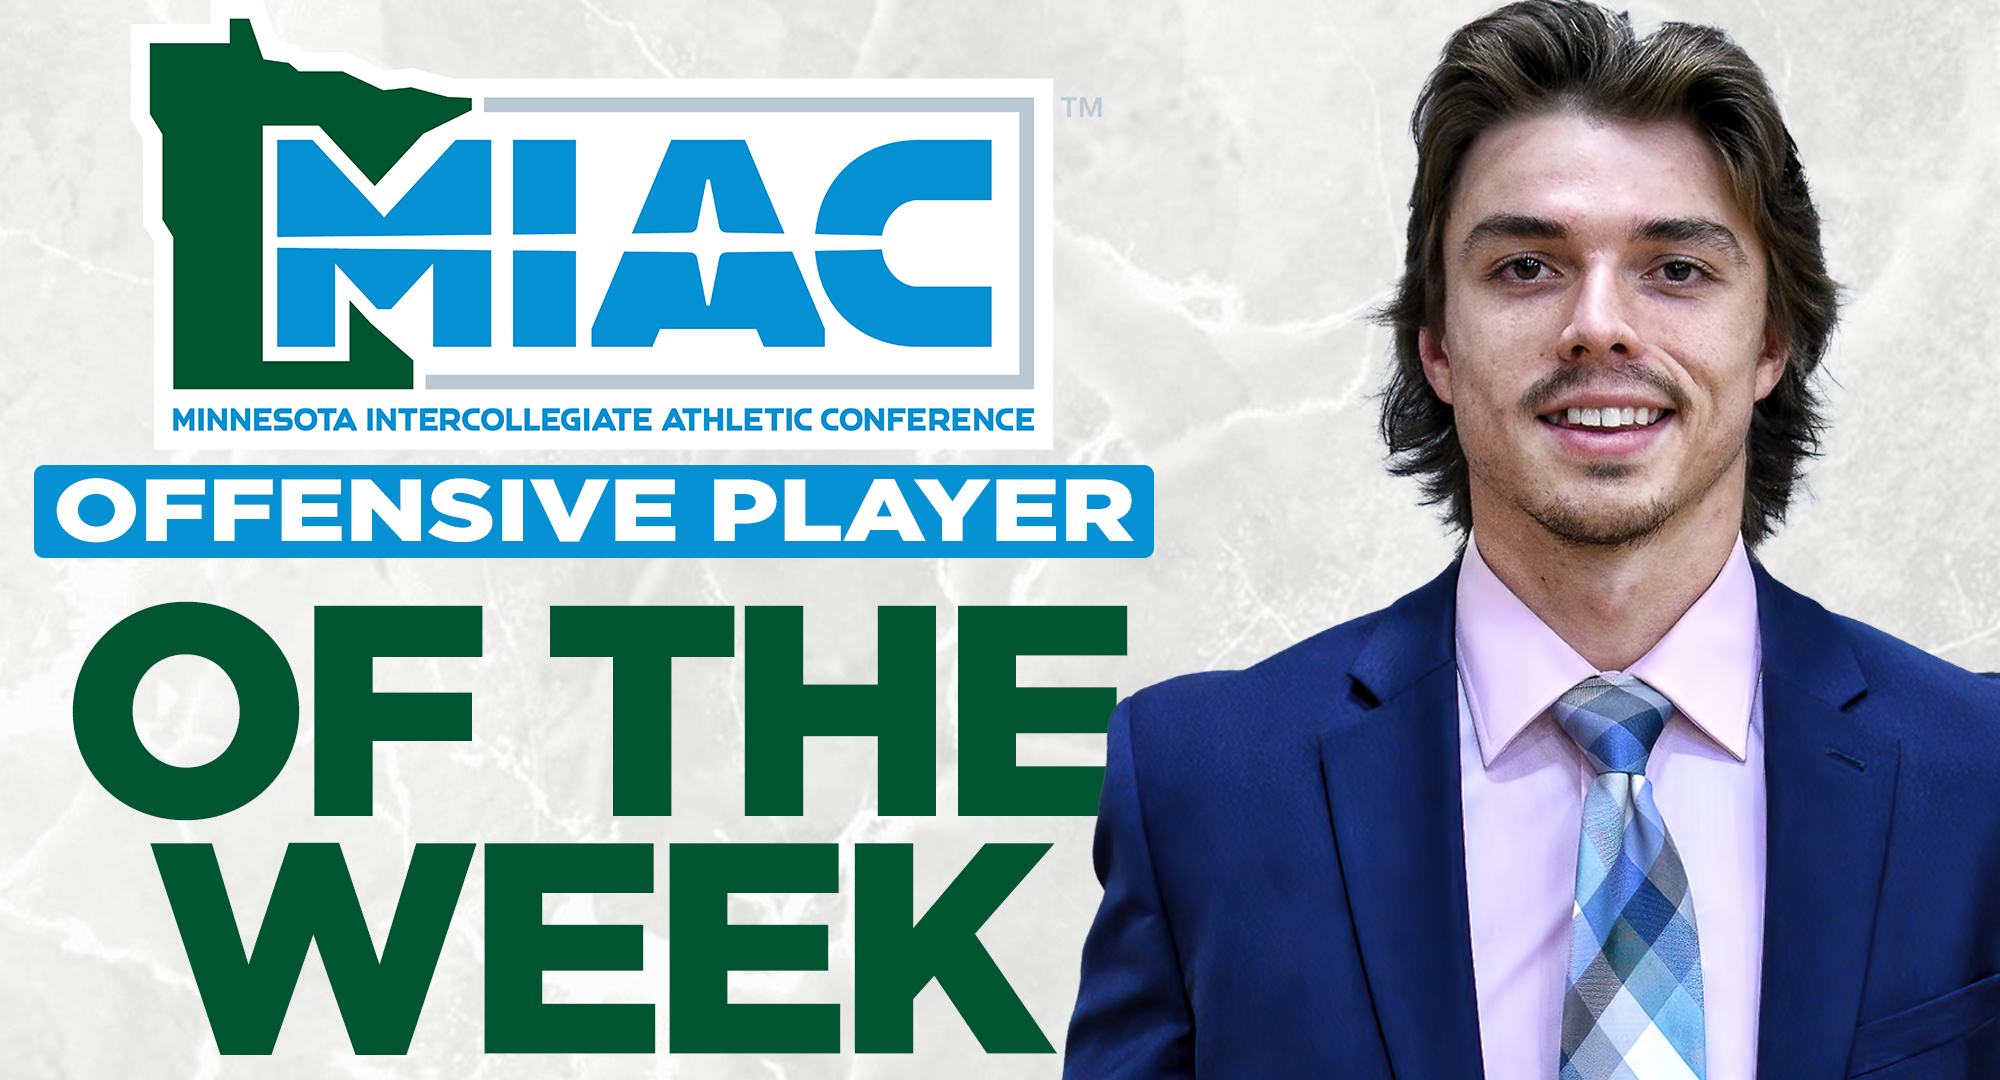 Hunter Olson was named the MIAC Offensive Player of the Week. He had both of the game-winning goals in the Cobbers' sweep over St. Olaf.